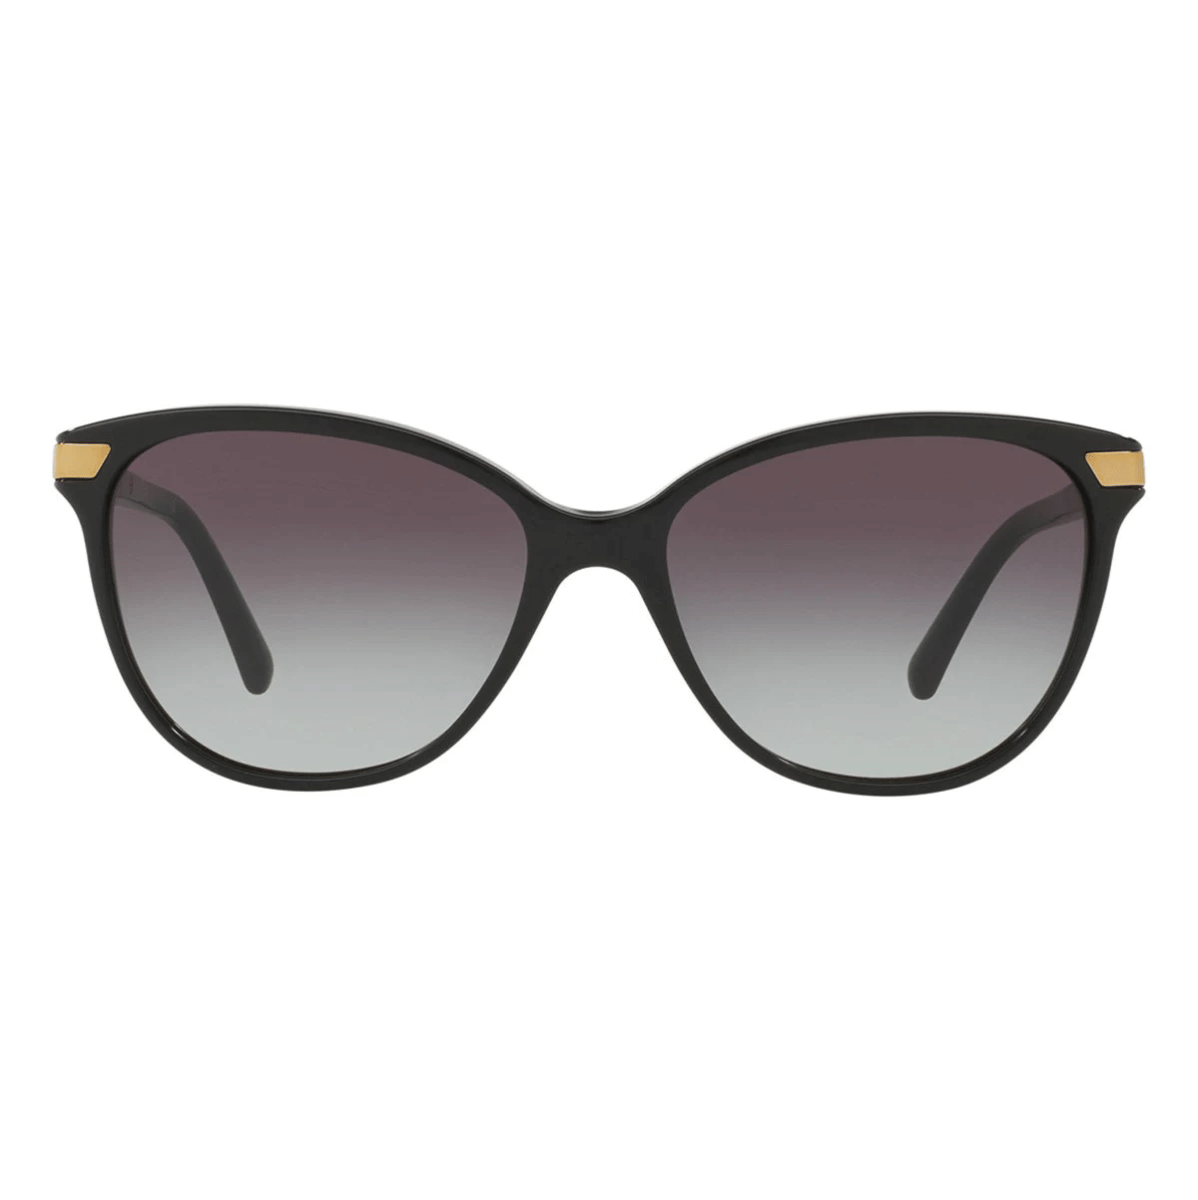 "Shop the latest women's Burberry BE4216 30018G grey cat-eye sunglasses at Optorium, showcasing the perfect blend of luxury and functionality with polarized lenses for superior eye protection."